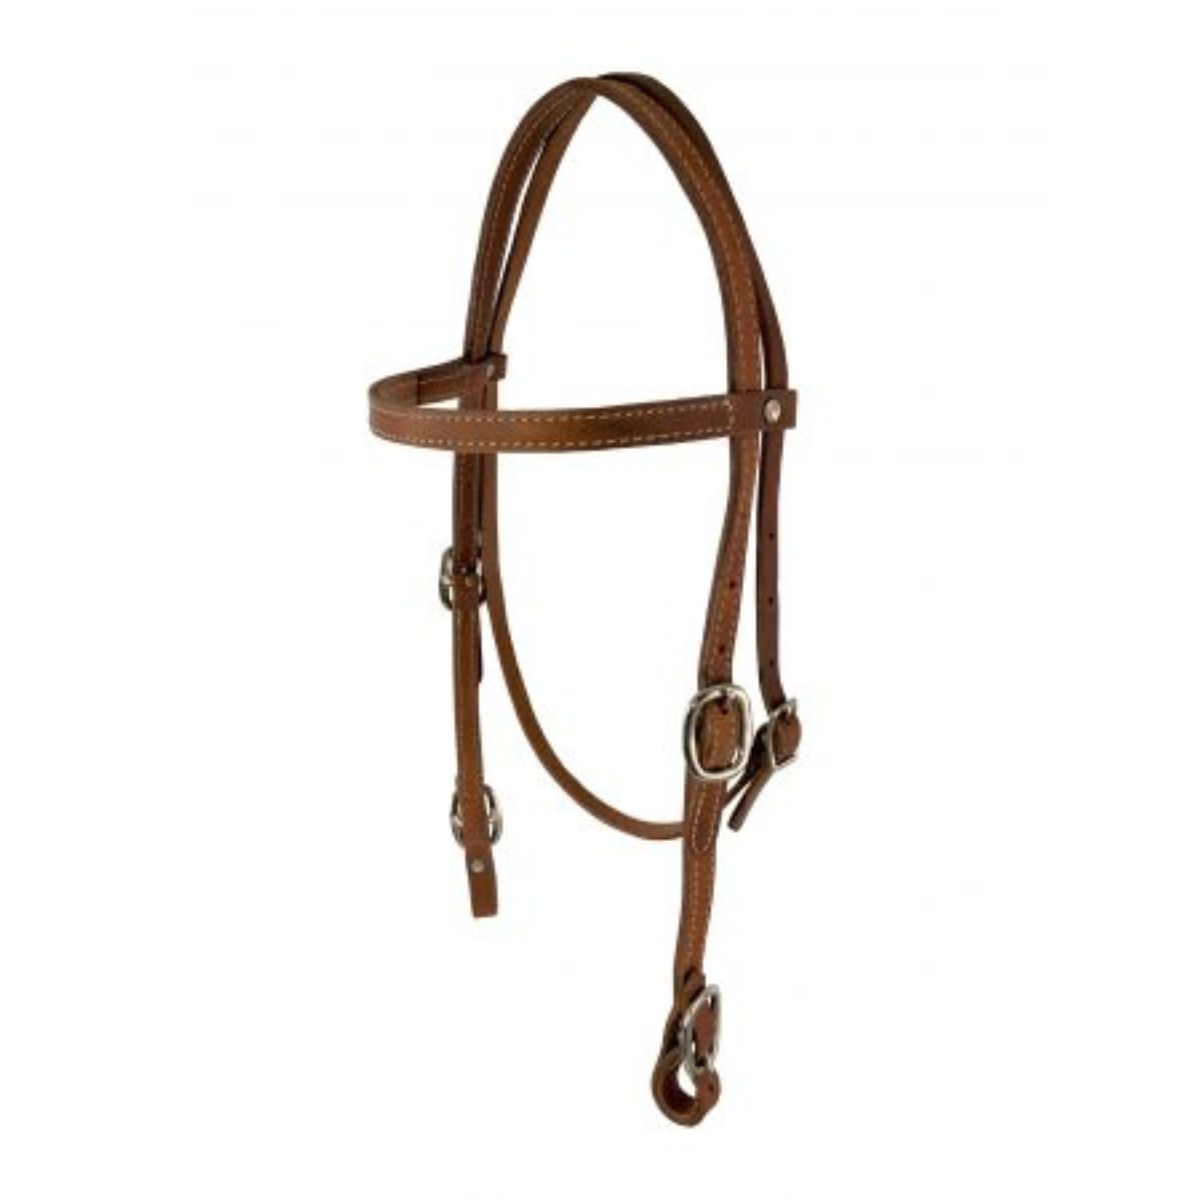 Showman ® Argentina Cow Leather headstall. - Double T Saddles